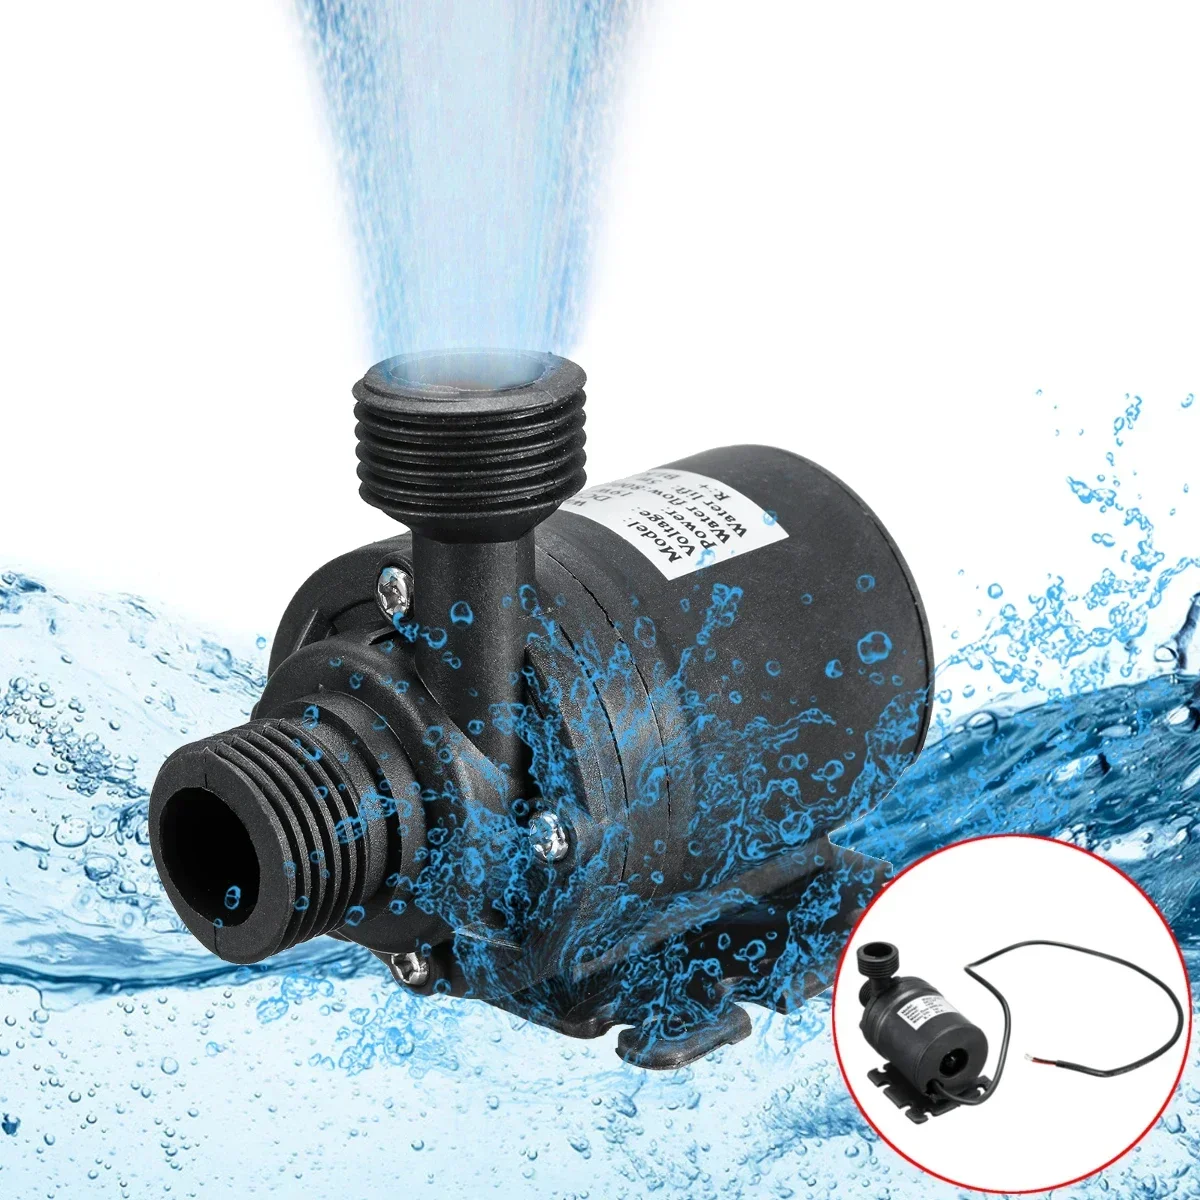 

DC 12V/24V 5M 800L/H Portable Mini Brushless Motor Ultra-Quiet Submersible Water Pump for Cooling System Fountains Heater